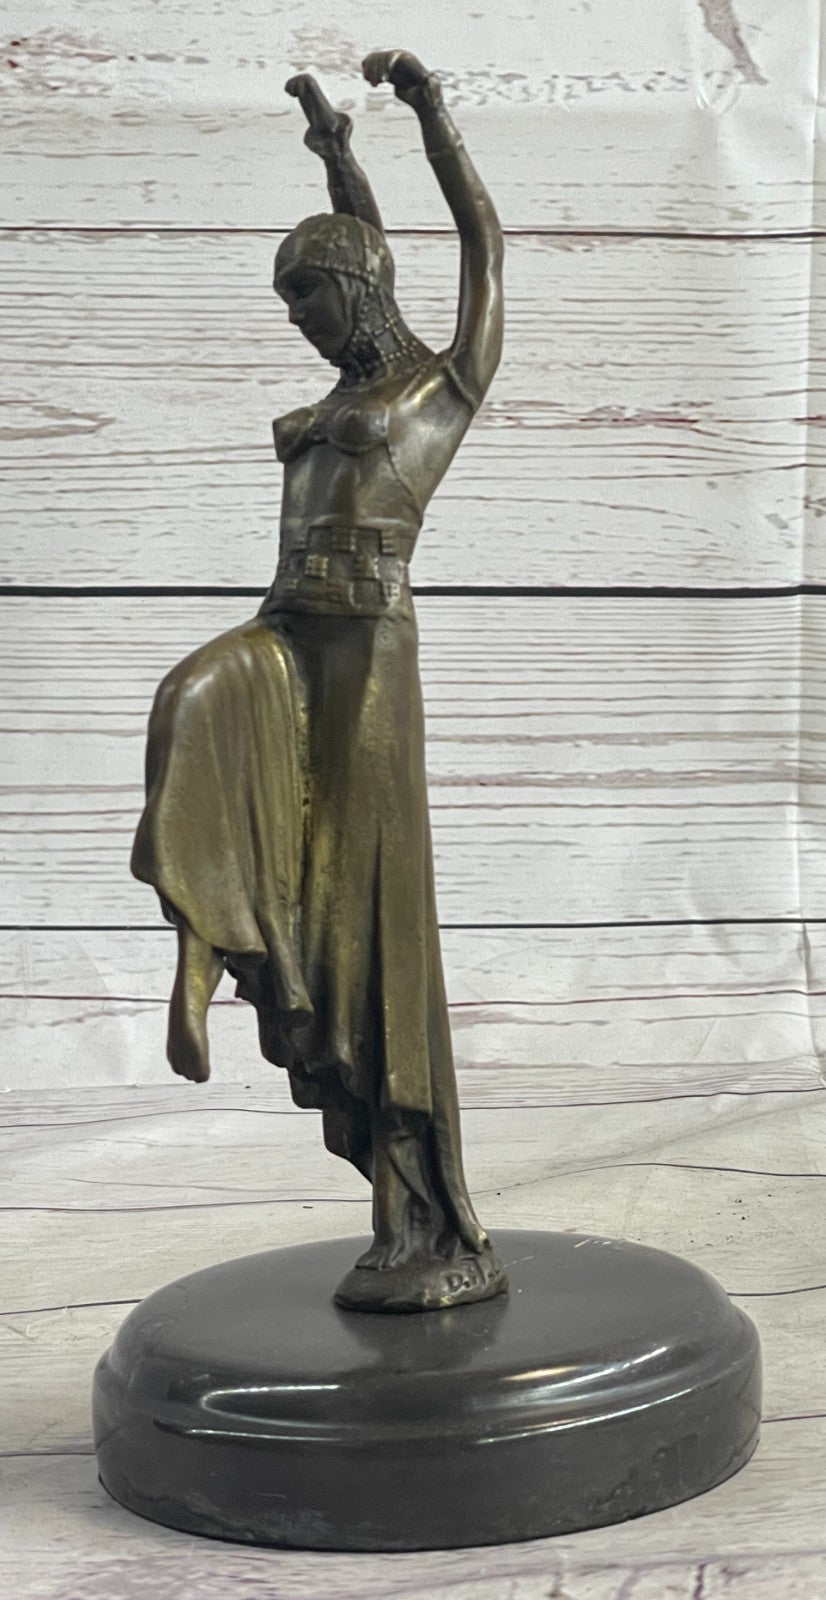 Handcrafted bronze sculpture SALE Chiparus Signed Dancer Tall 10" Deco Art